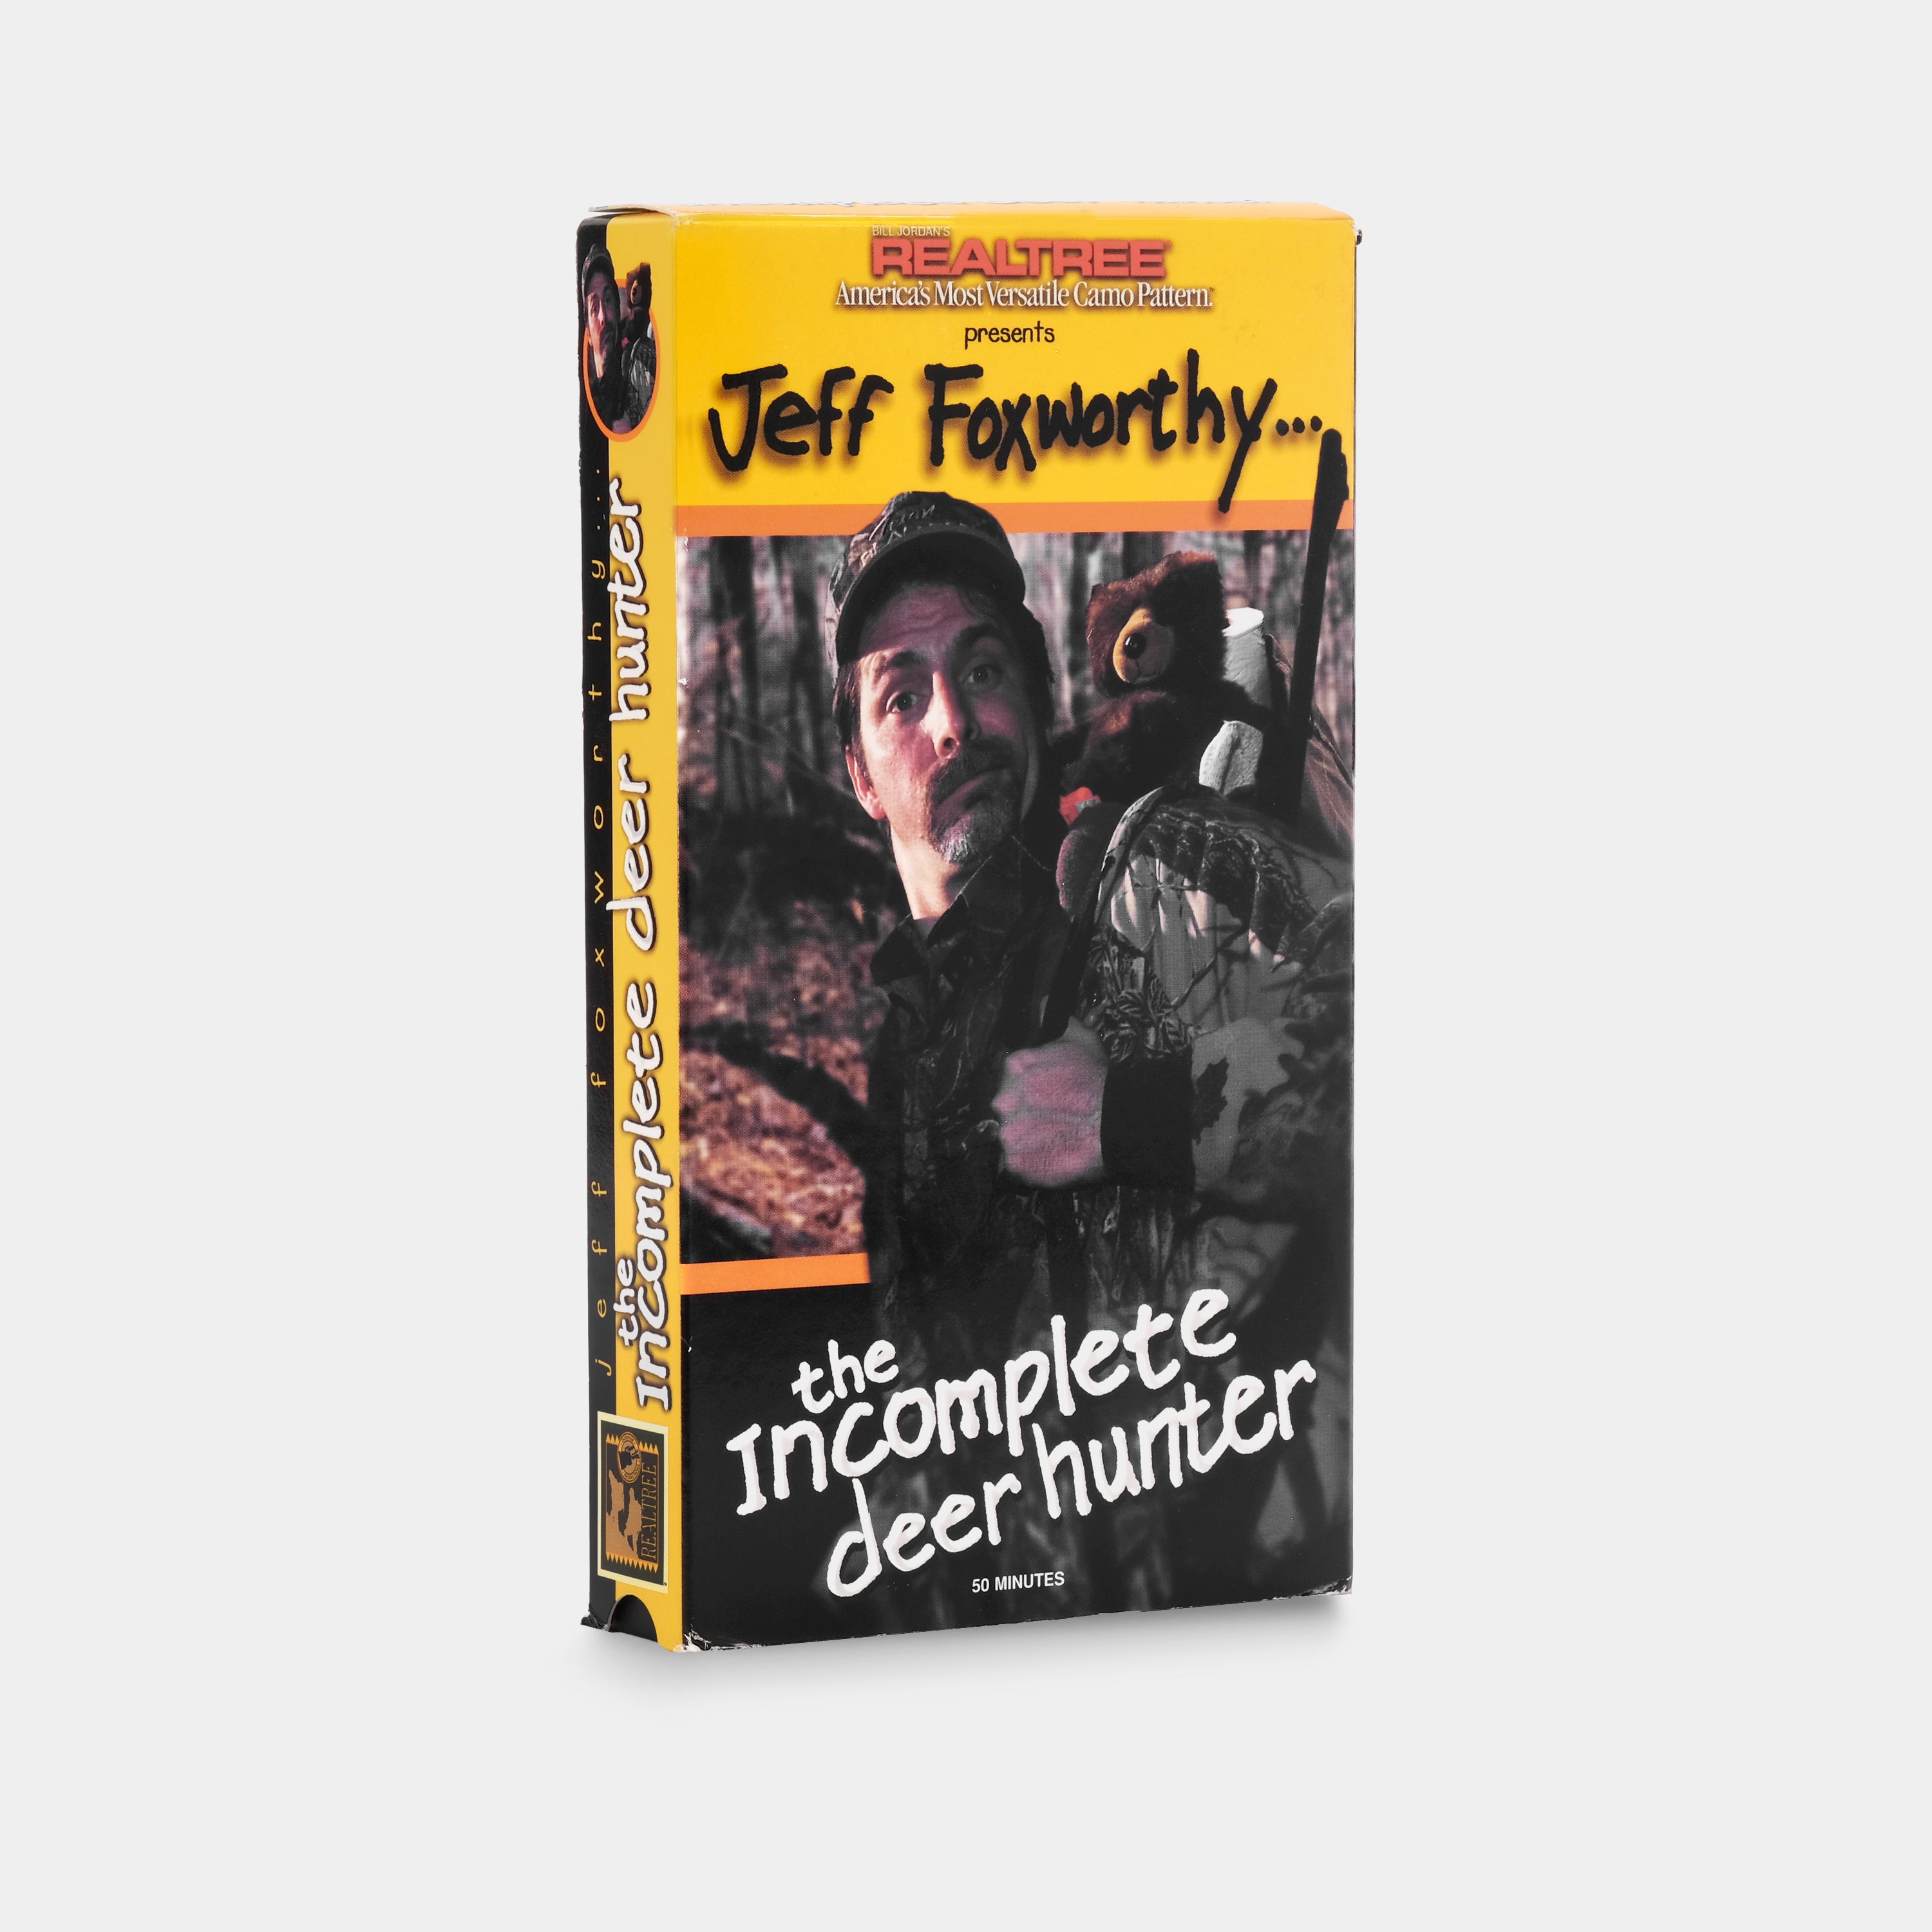 Jeff Foxworthy... The Incomplete Deer Hunter VHS Tape